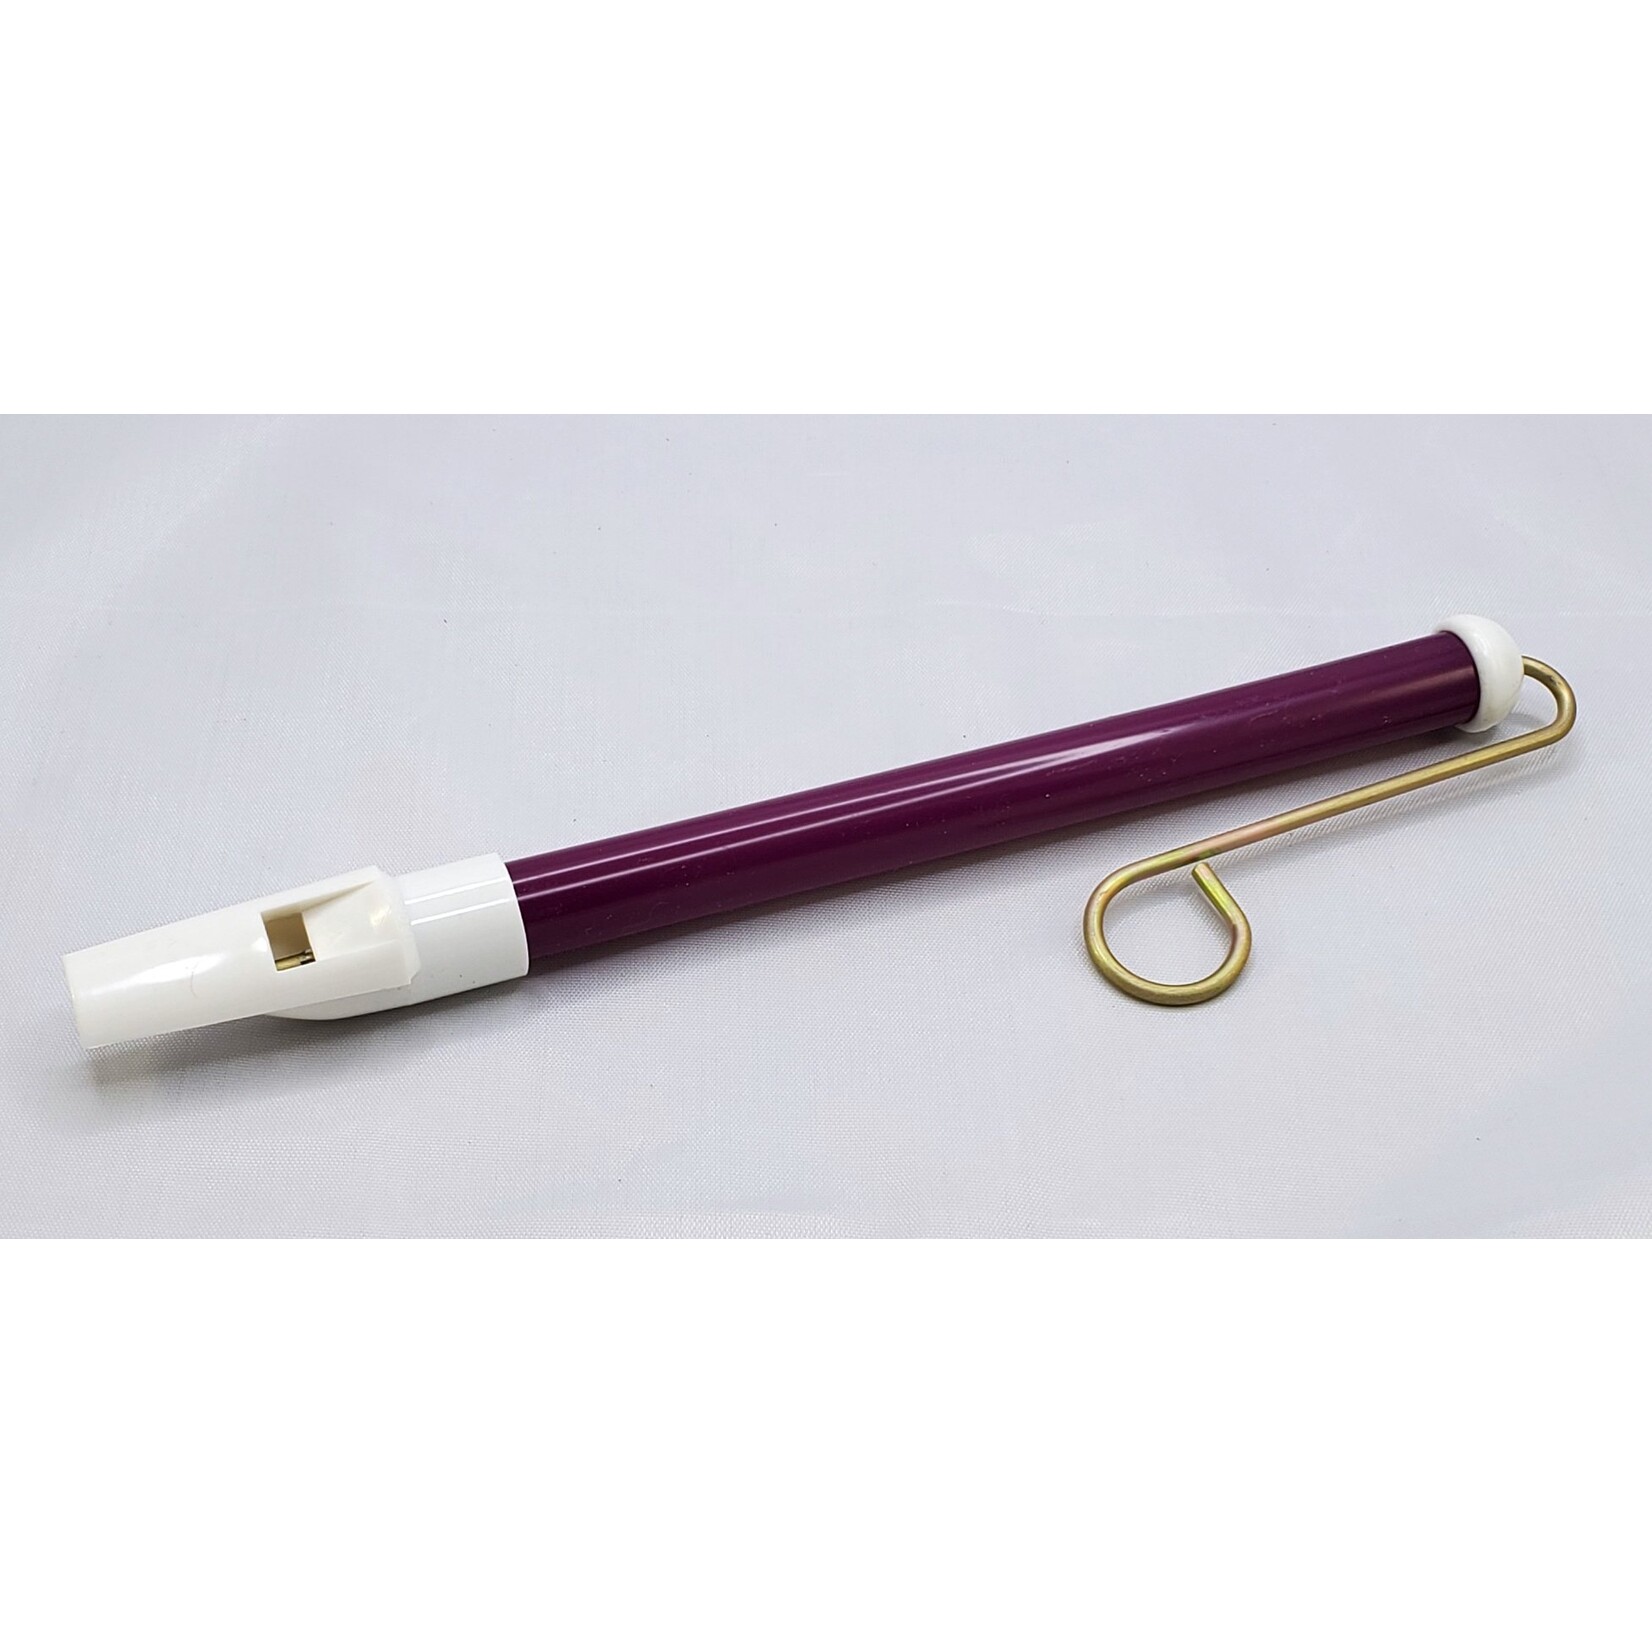 First Note Slide Whistle Plastic